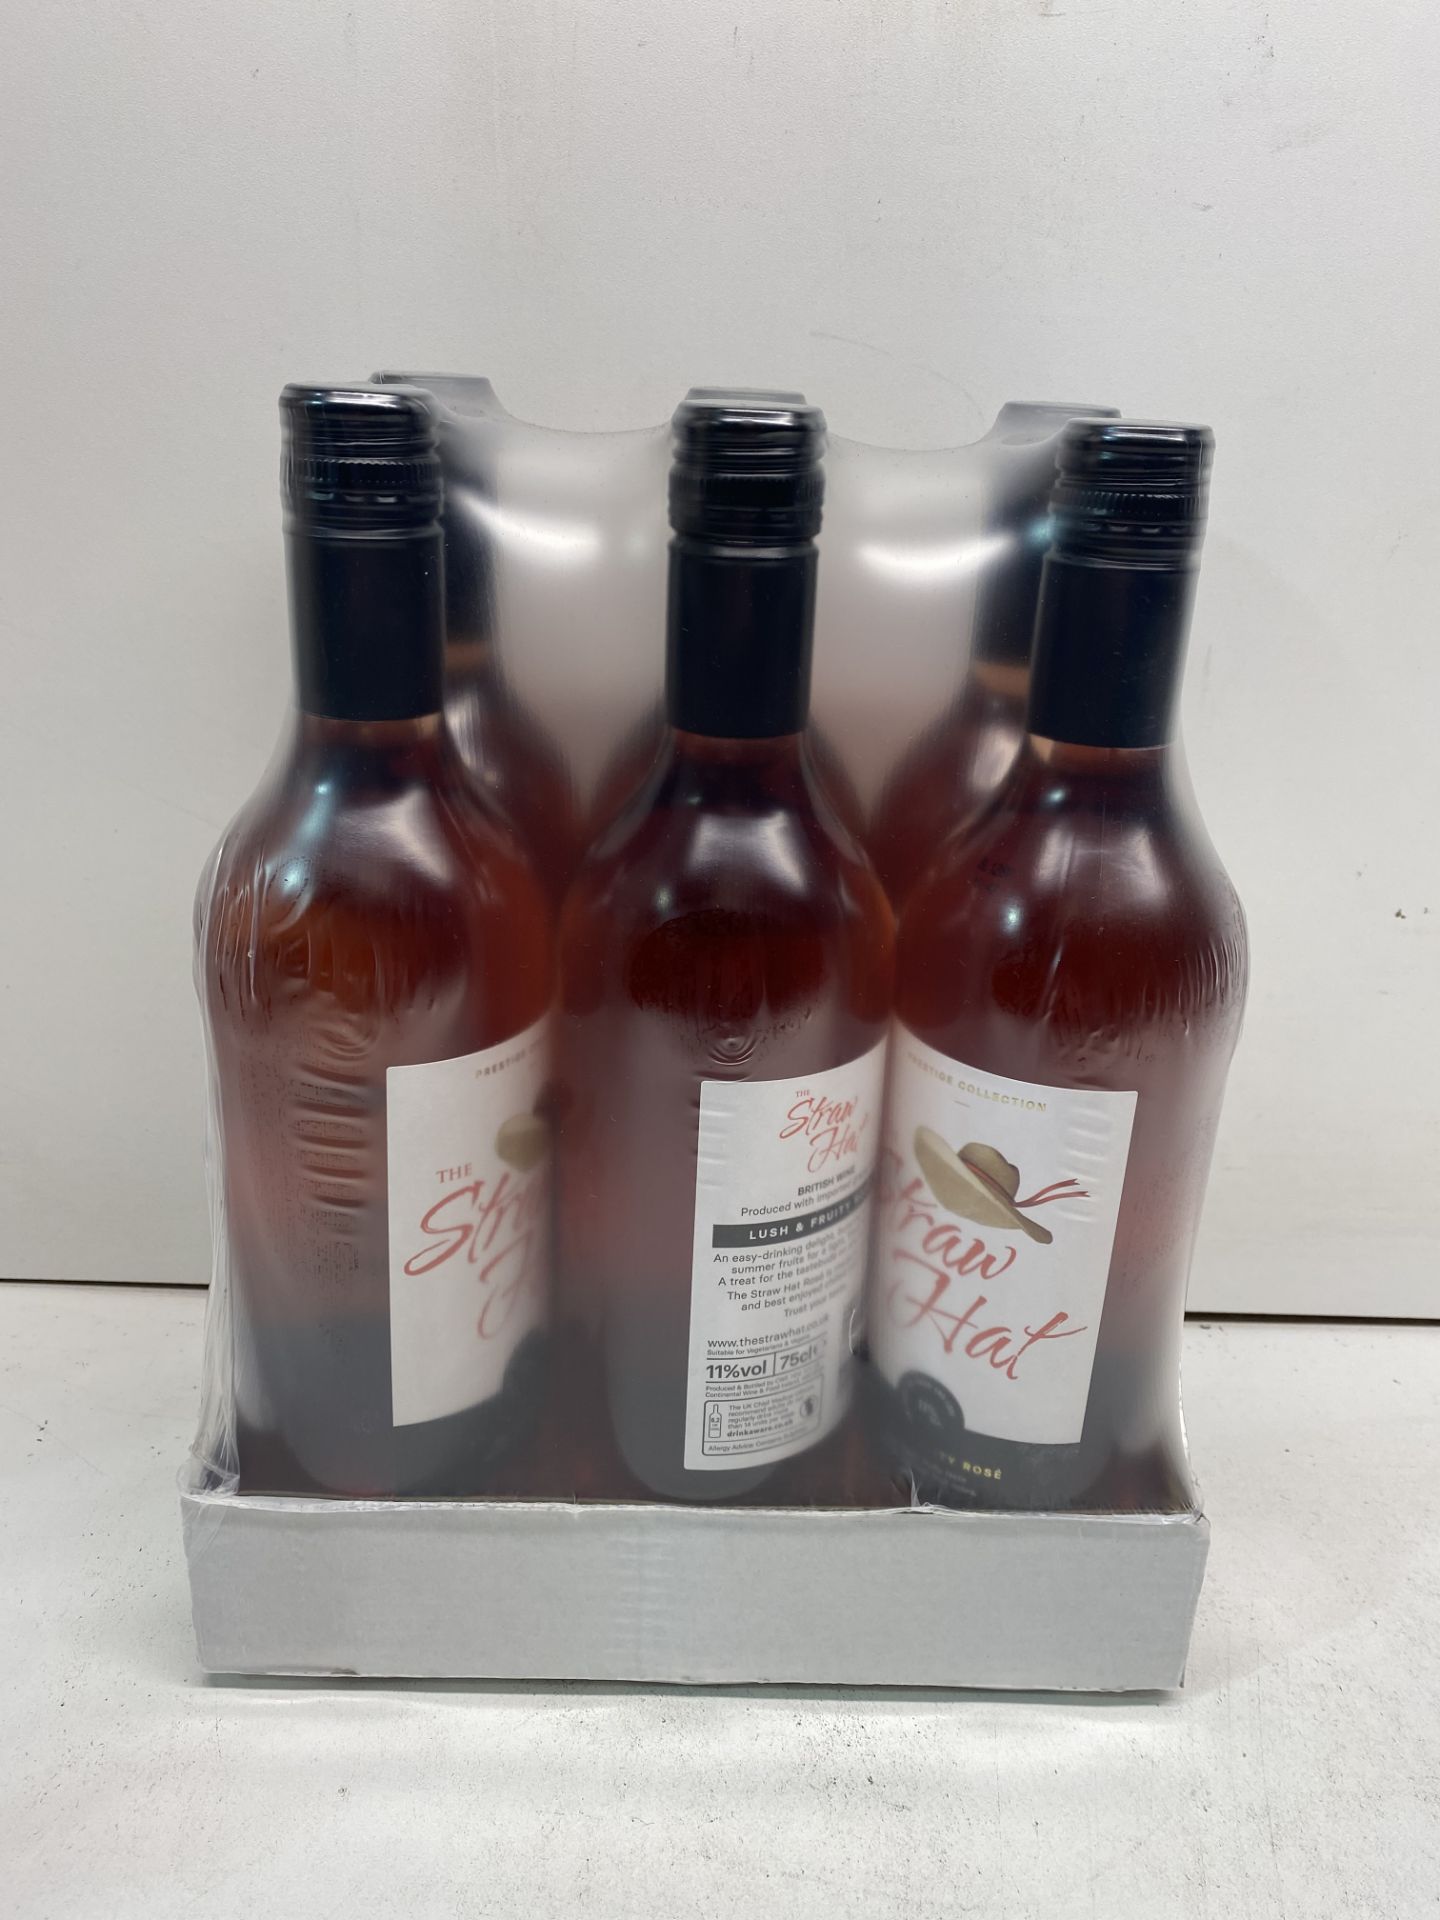 18 x Bottles Of The Straw Hat Rose Wine - Image 2 of 3